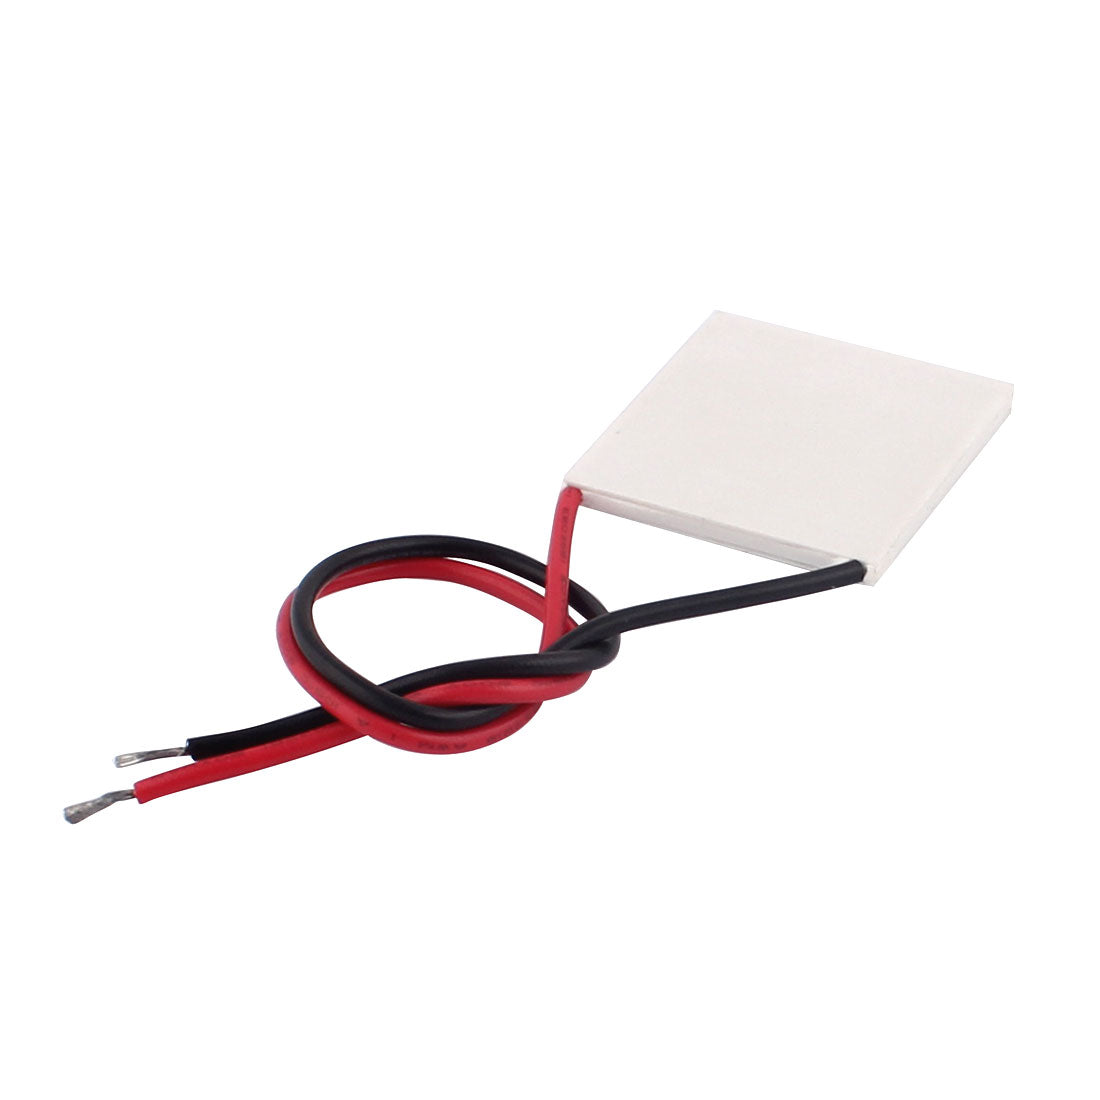 uxcell Uxcell TEC1-12715 11.8A 12V 142W 40x40x3.5mm Thermoelectric Cooler Peltier Plate Module